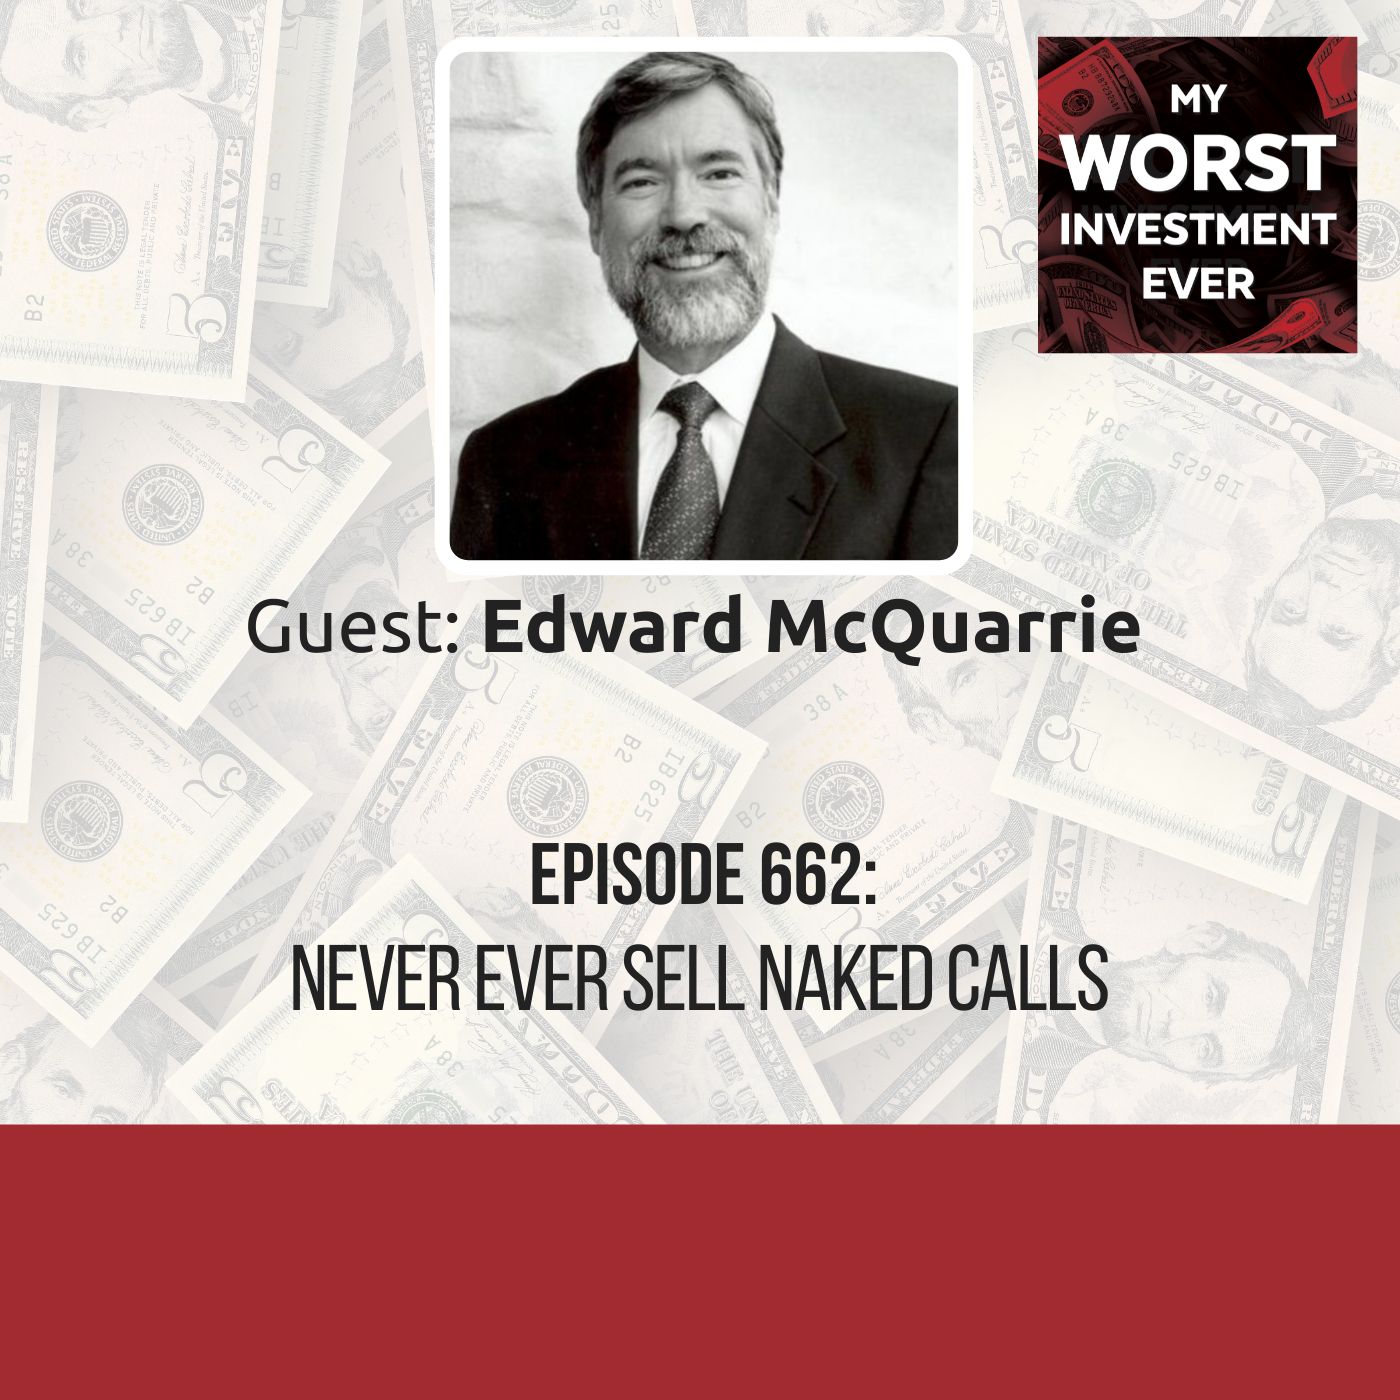 Edward McQuarrie – Never Ever Sell Naked Calls